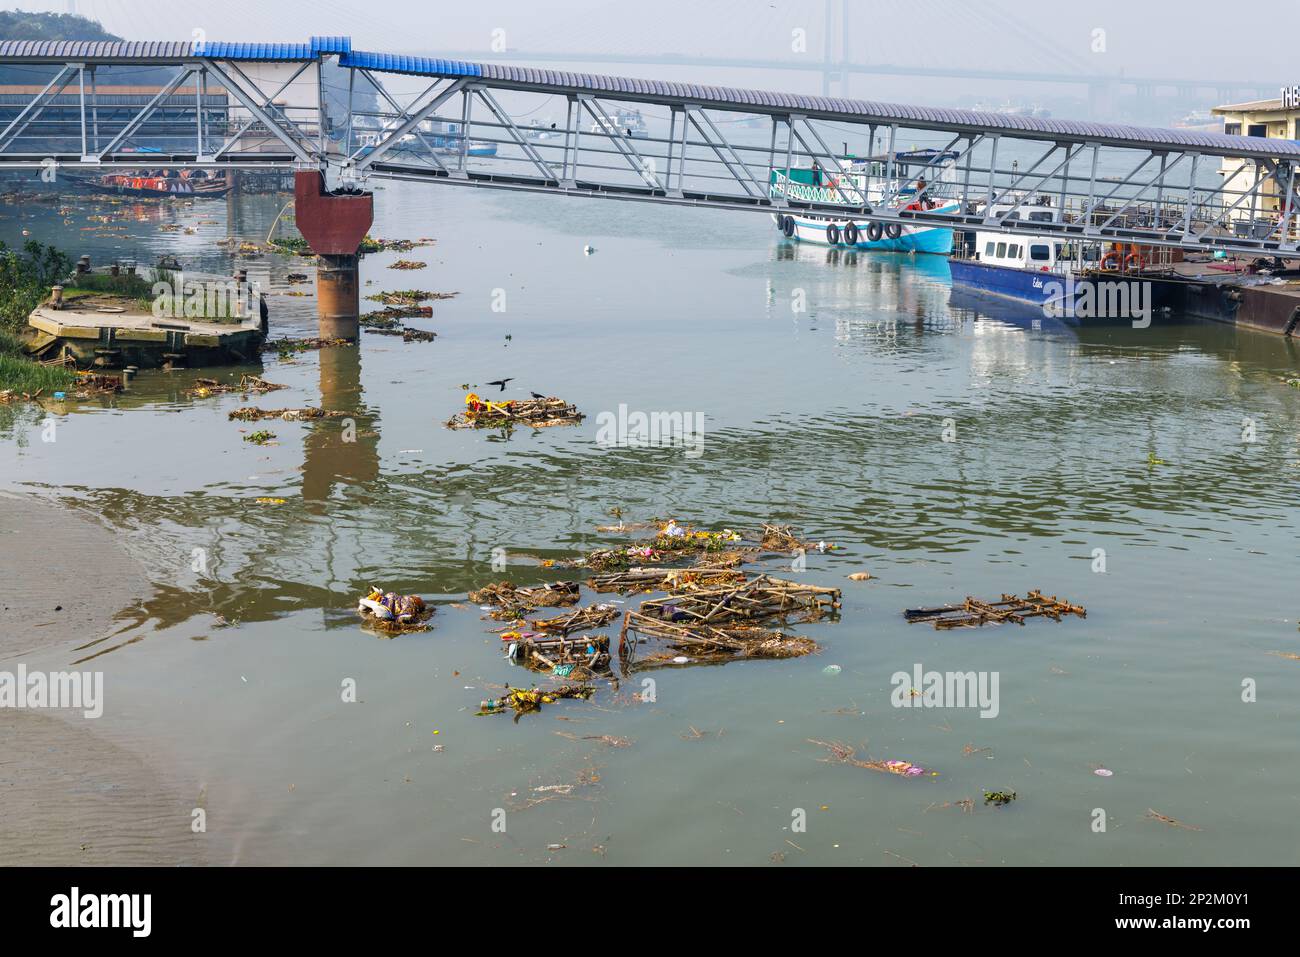 Rubbish and discarded effigies of the goddess Kali on the riverbank, River Police Jetty on the Hooghly River at Kolkata (Calcutta), West Bengal, India Stock Photo